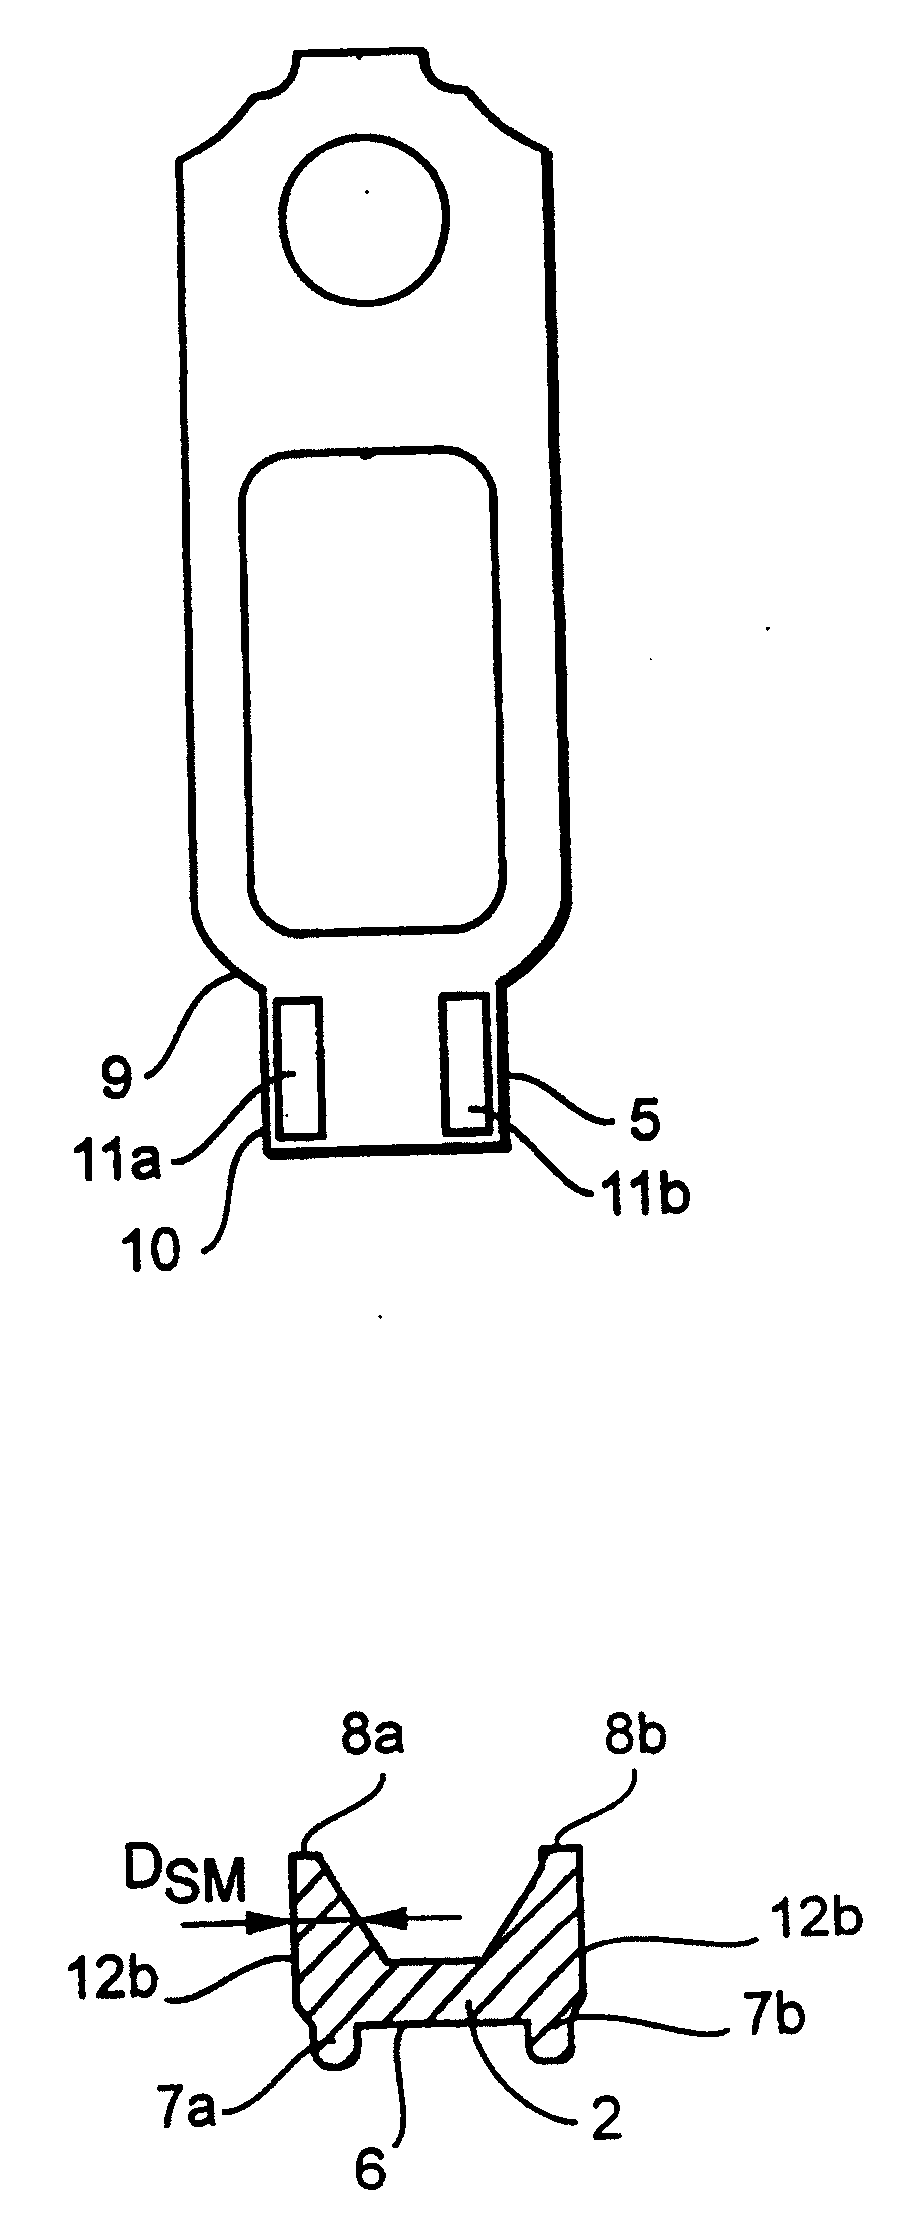 Lever-shaped metal sheet cam component